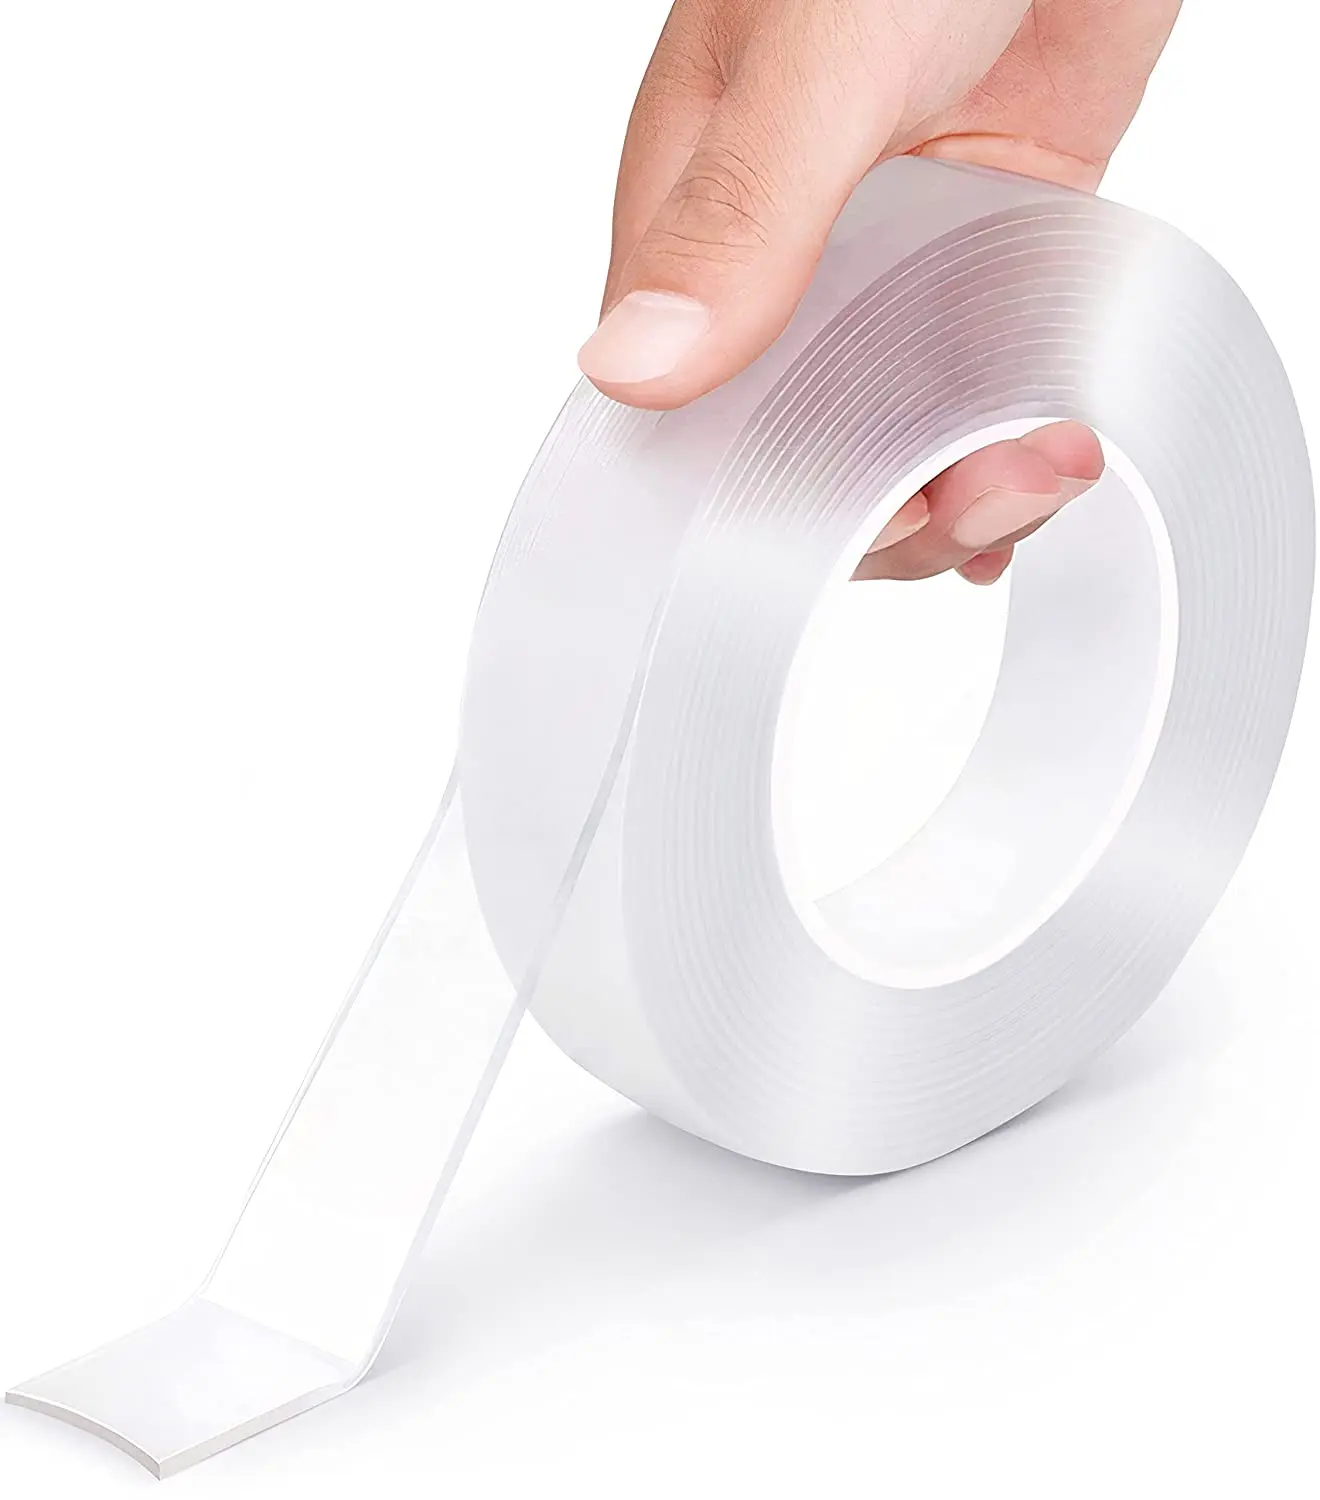 Very angry Grab shape double sided tape where to buy writing